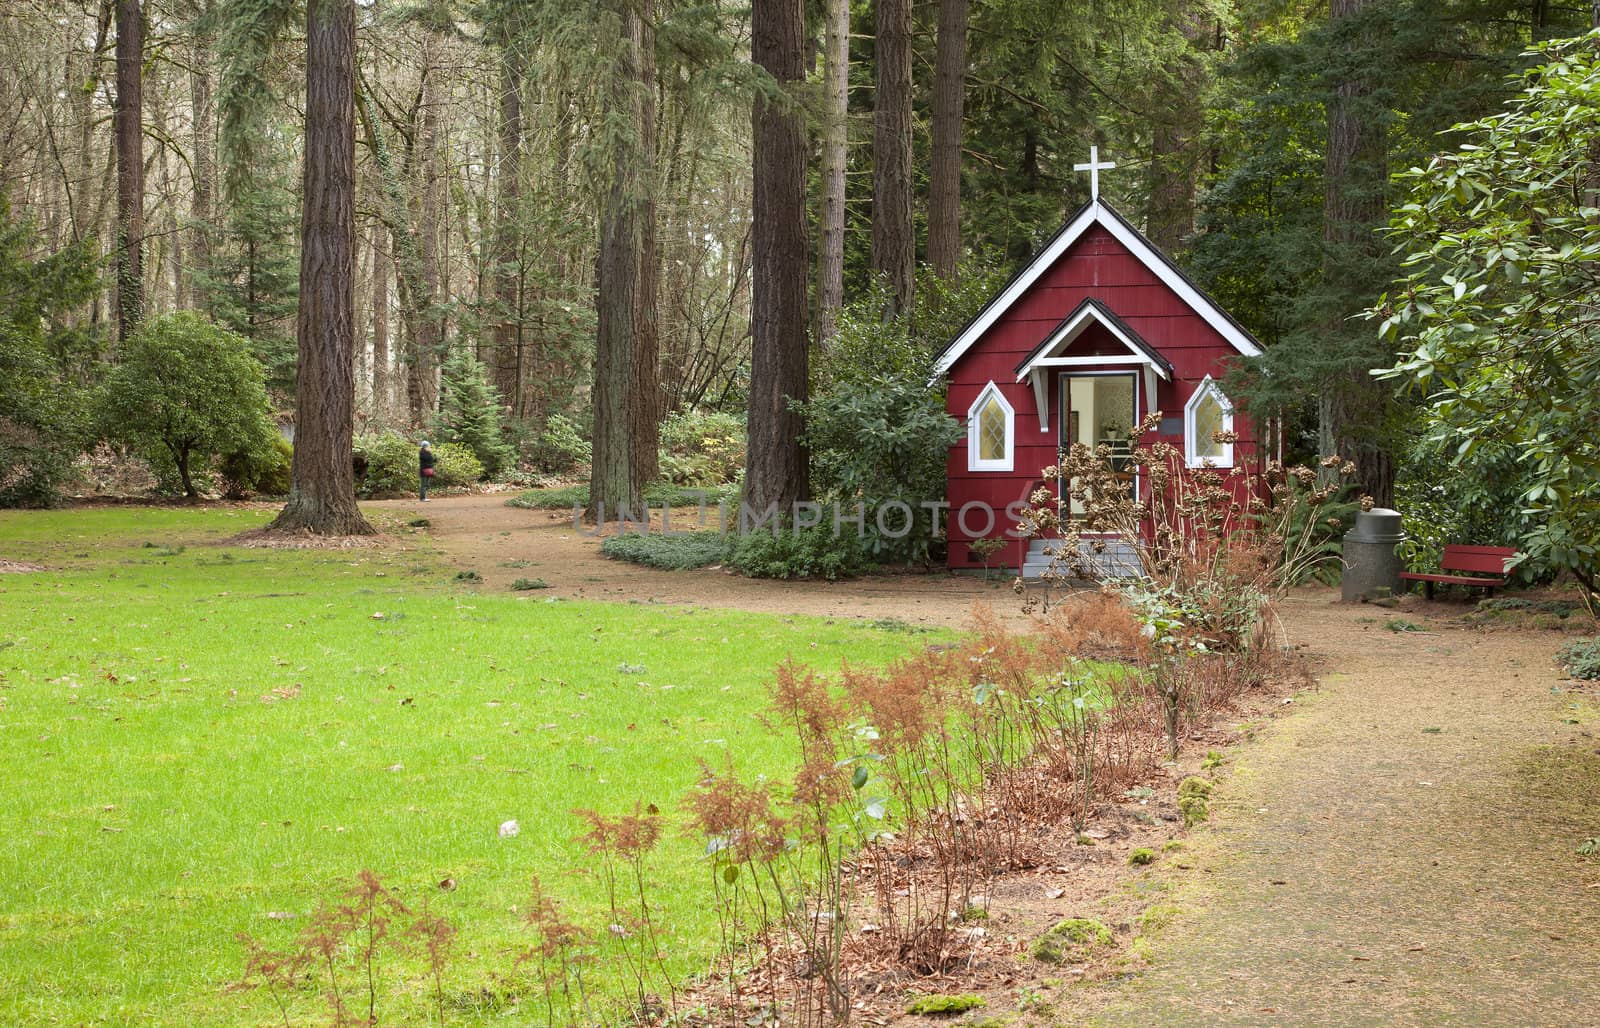 A small red chapel in a forest, Portland OR. by Rigucci